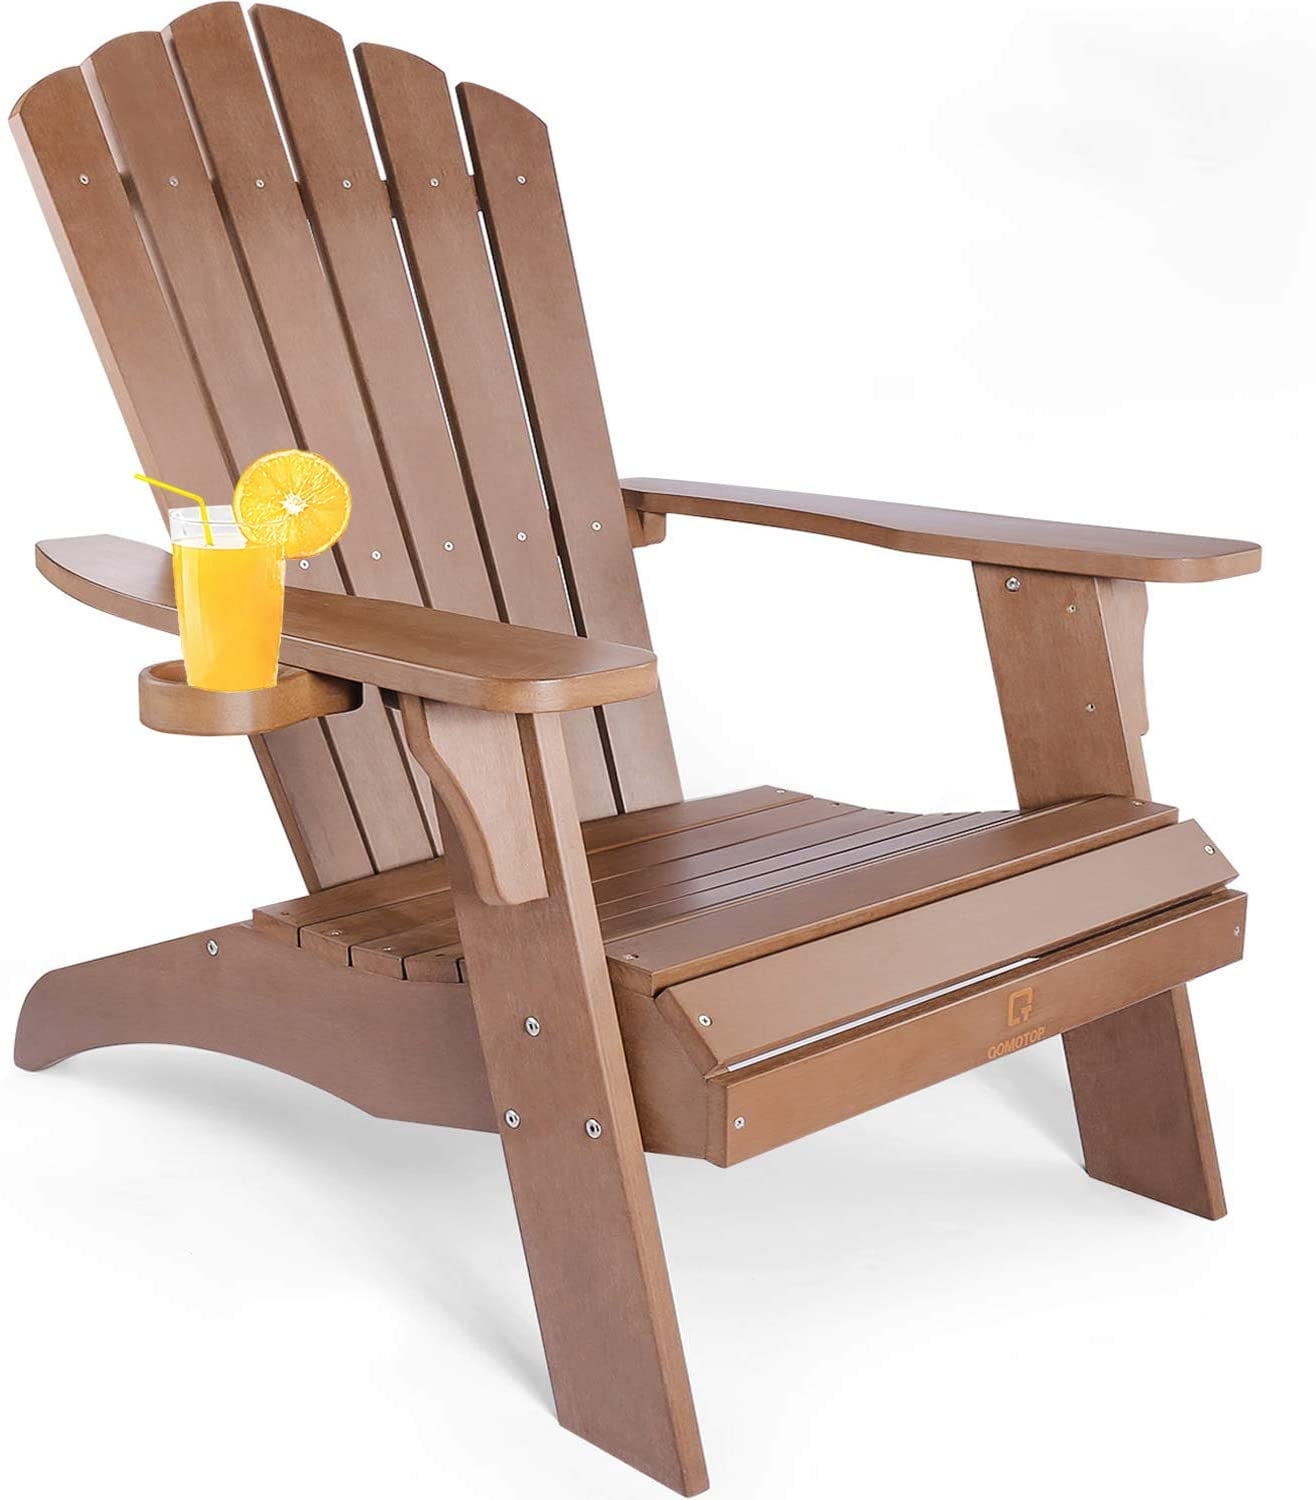 NEW POLY WOOD PLASTIC Cup Holder for Adirondack Chair LIME GREEN 15 A01 